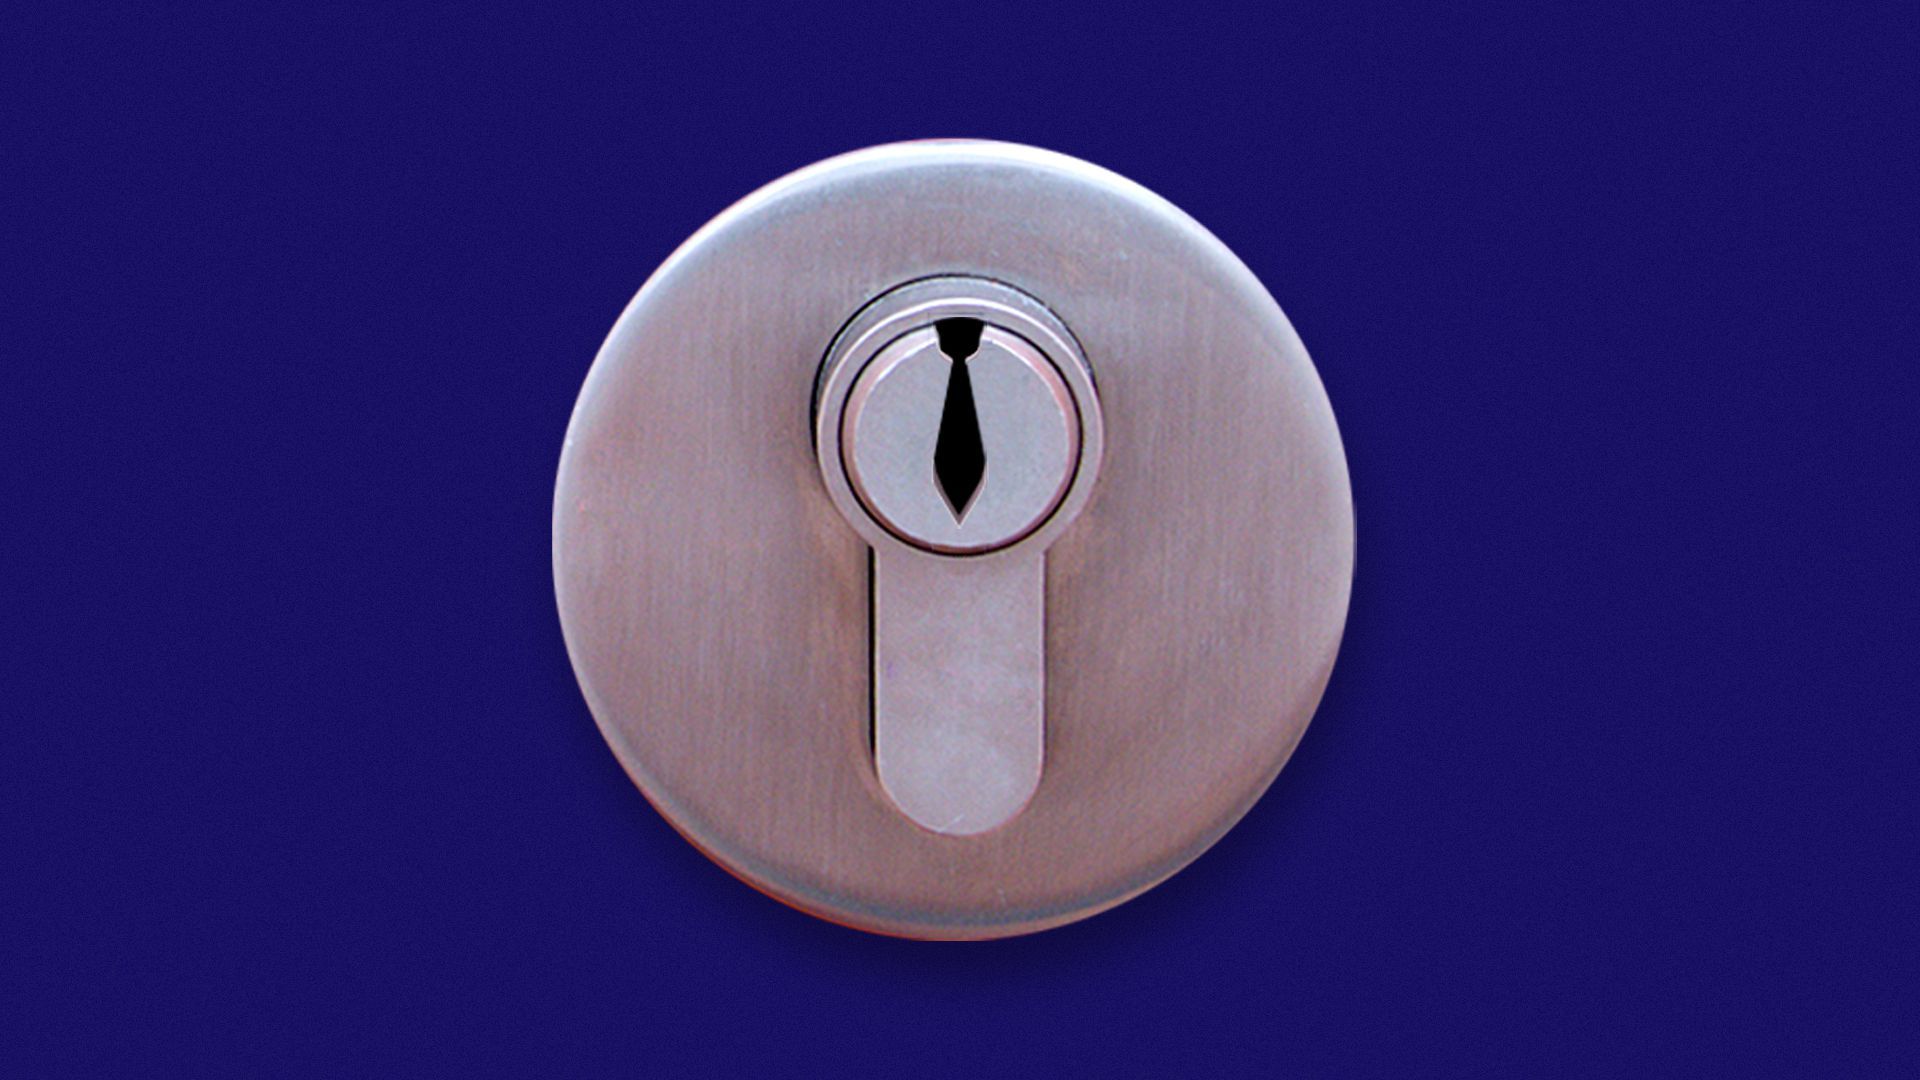 Illustration of a door lock in the shape of a neck tie